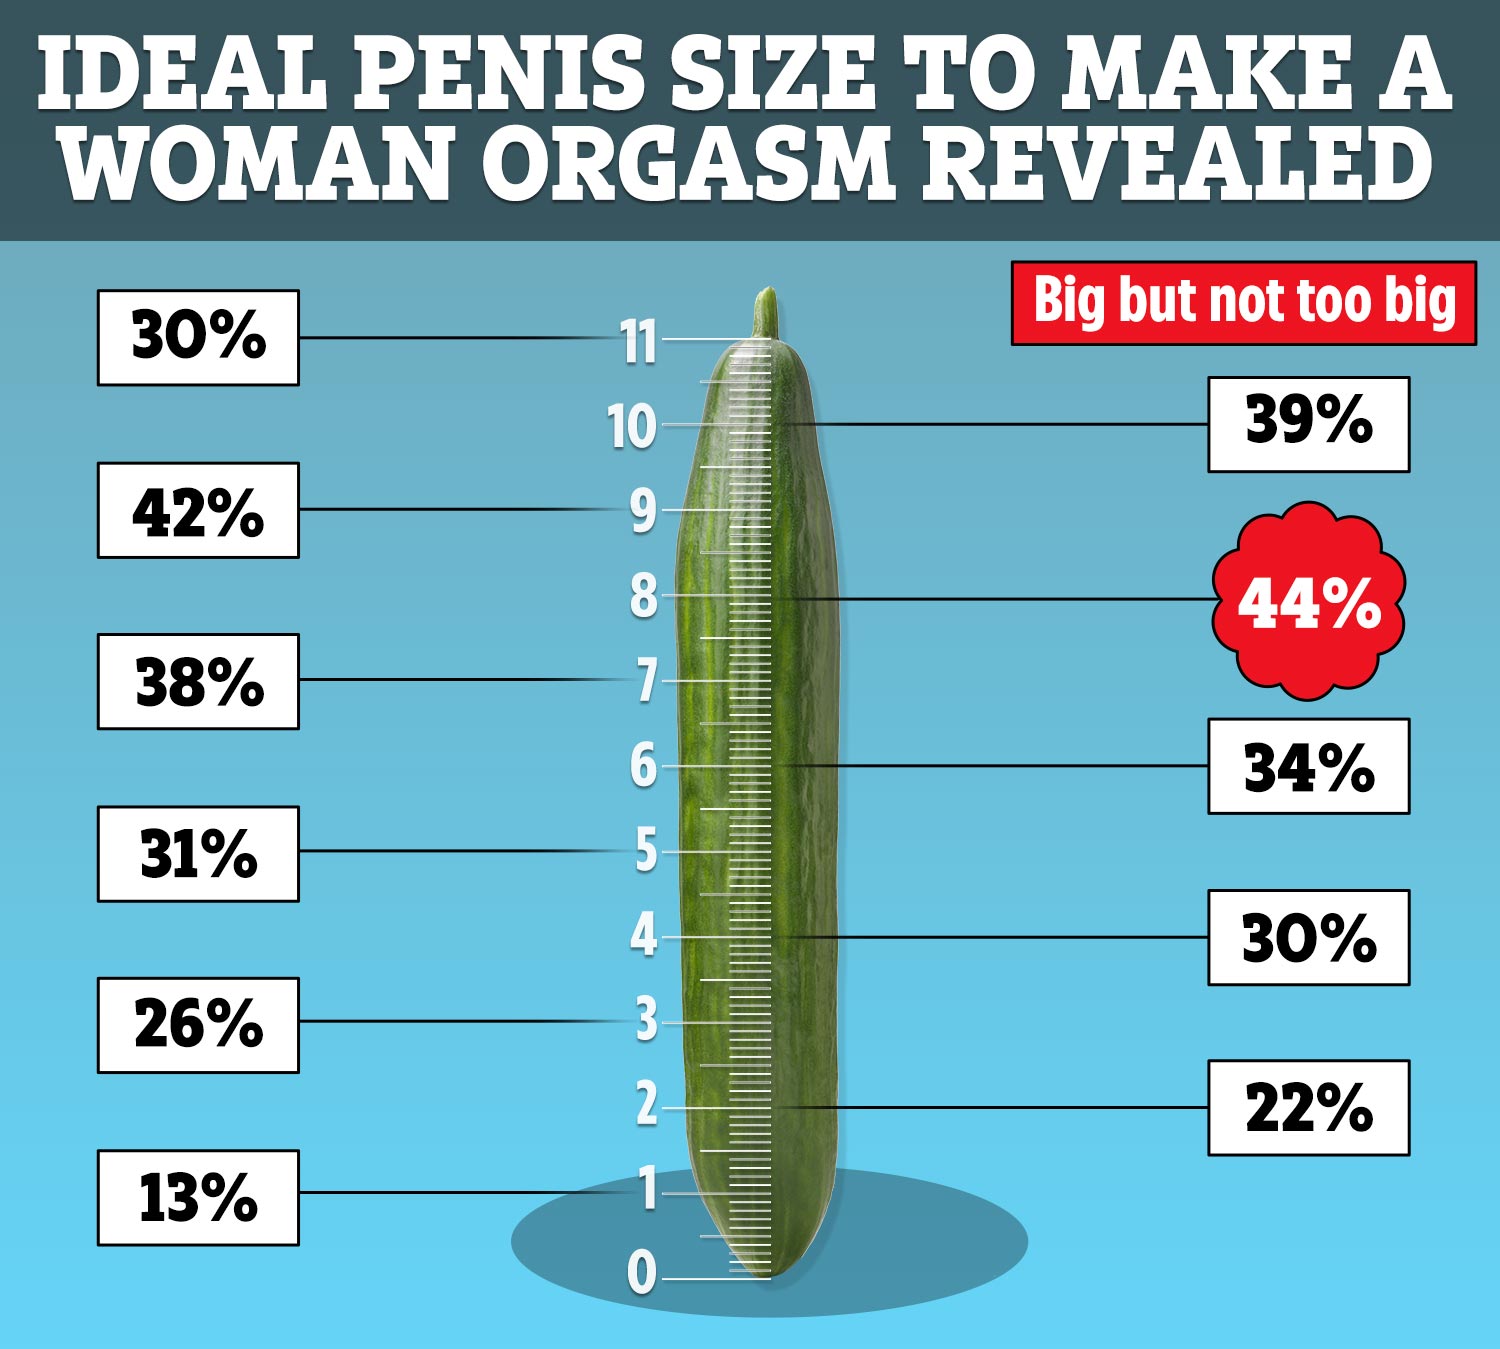 KH-GRAPHIC-IDEAL-PENIS-SIZE-1.jpg